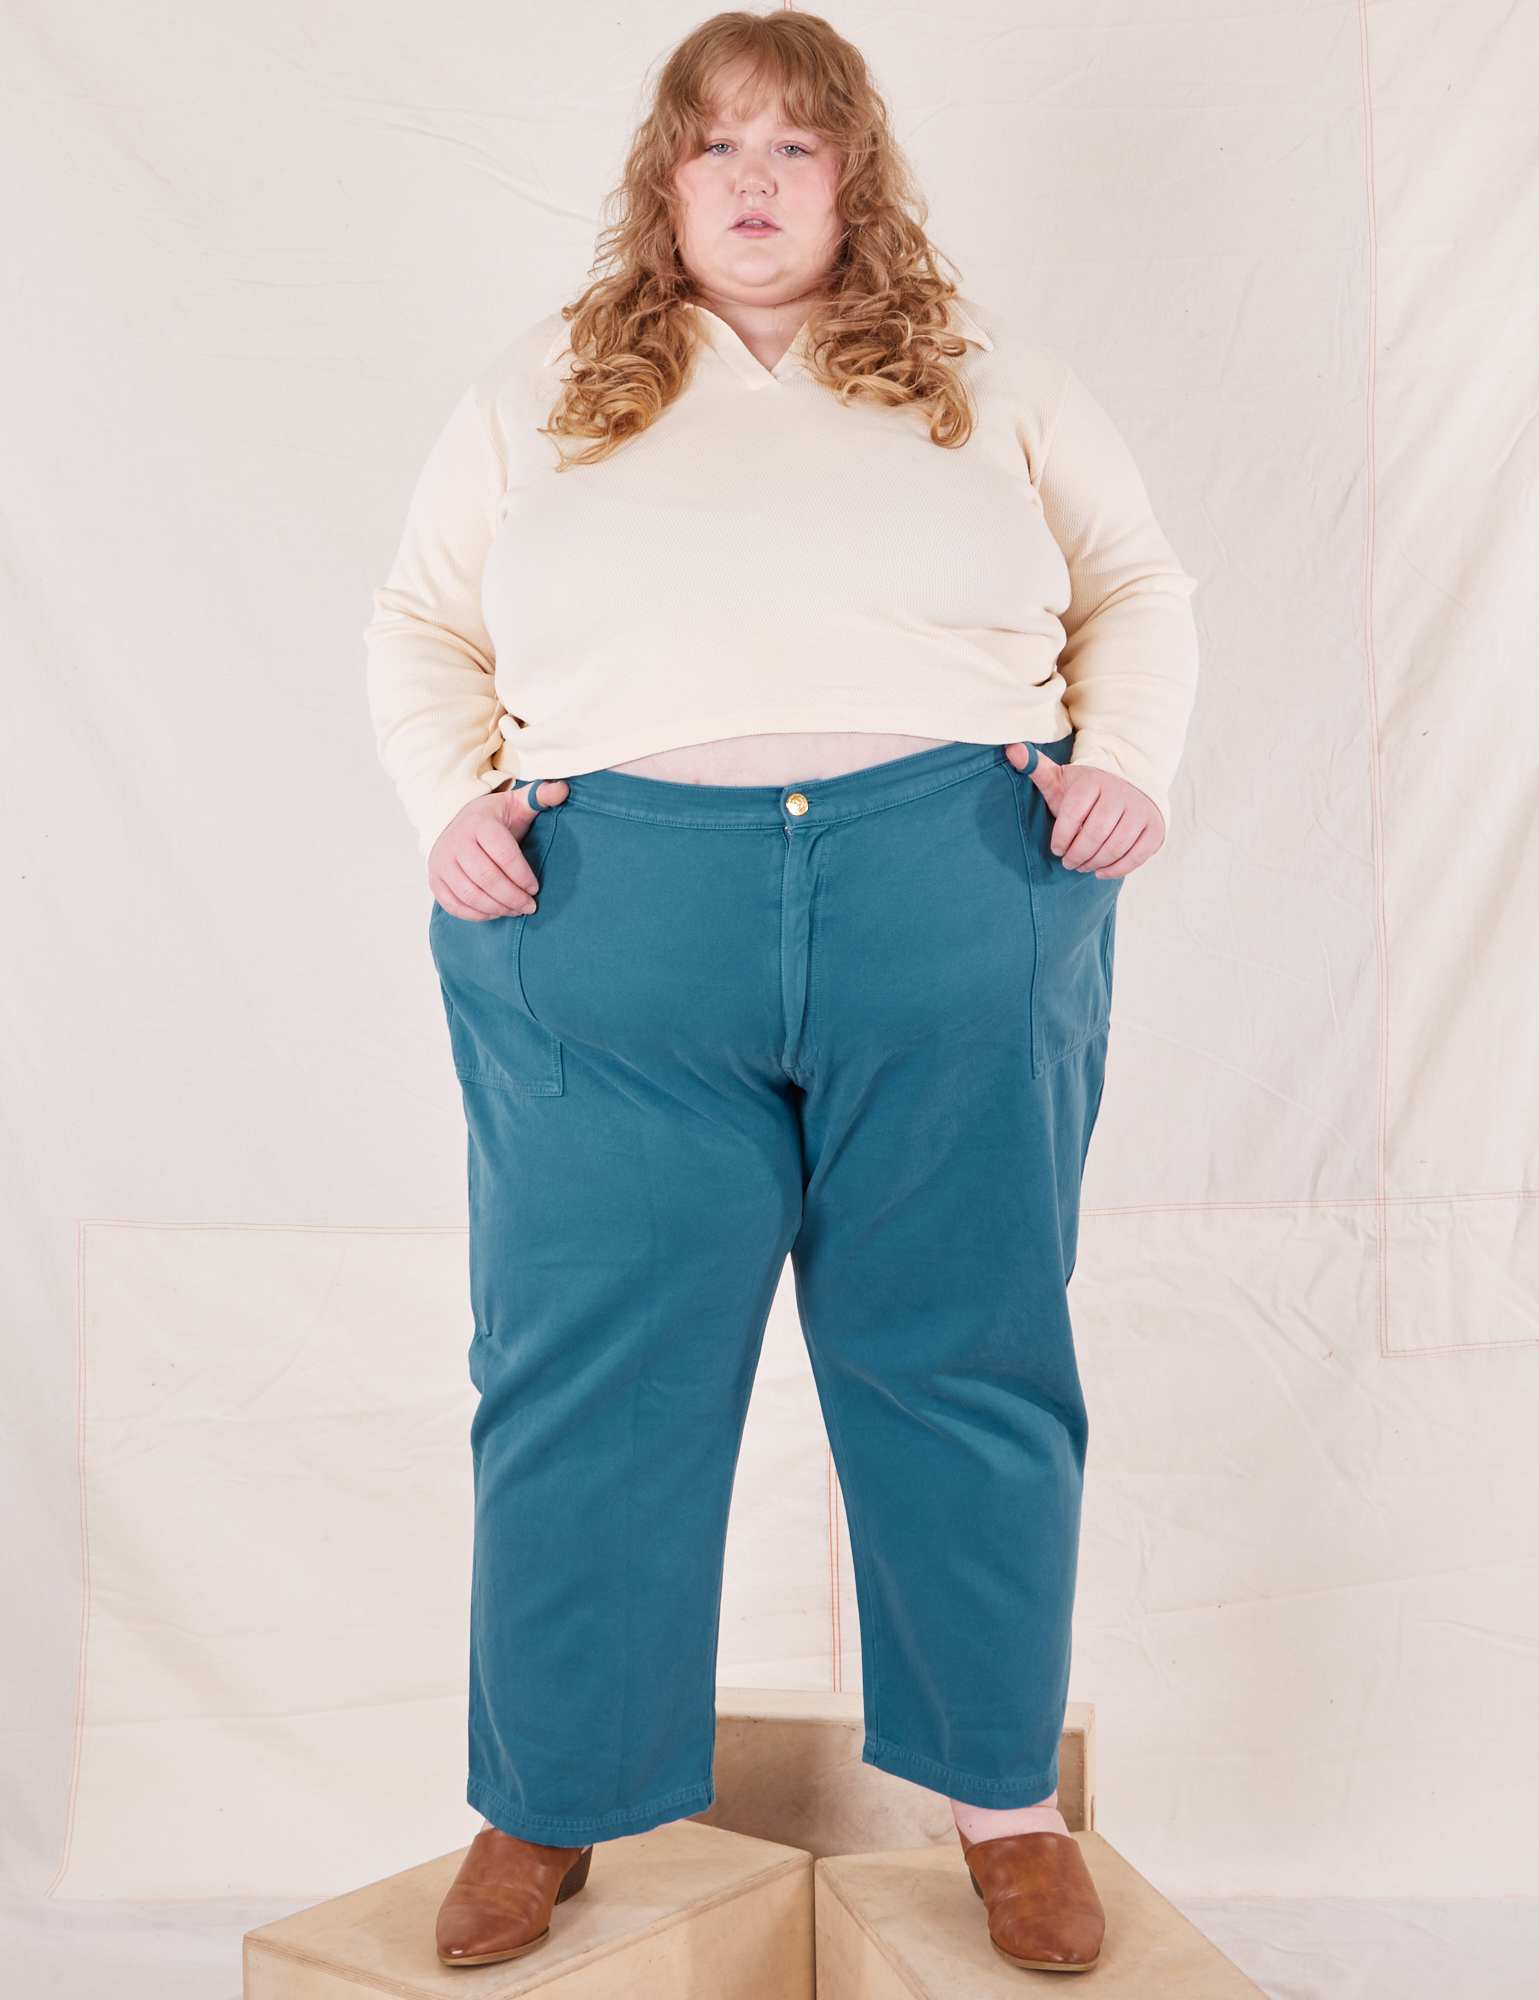 Catie is 5&#39;11&quot; and wearing 5XL Organic Work Pants in Marine Blue paired with vintage off-white Long Sleeve Fisherman Polo